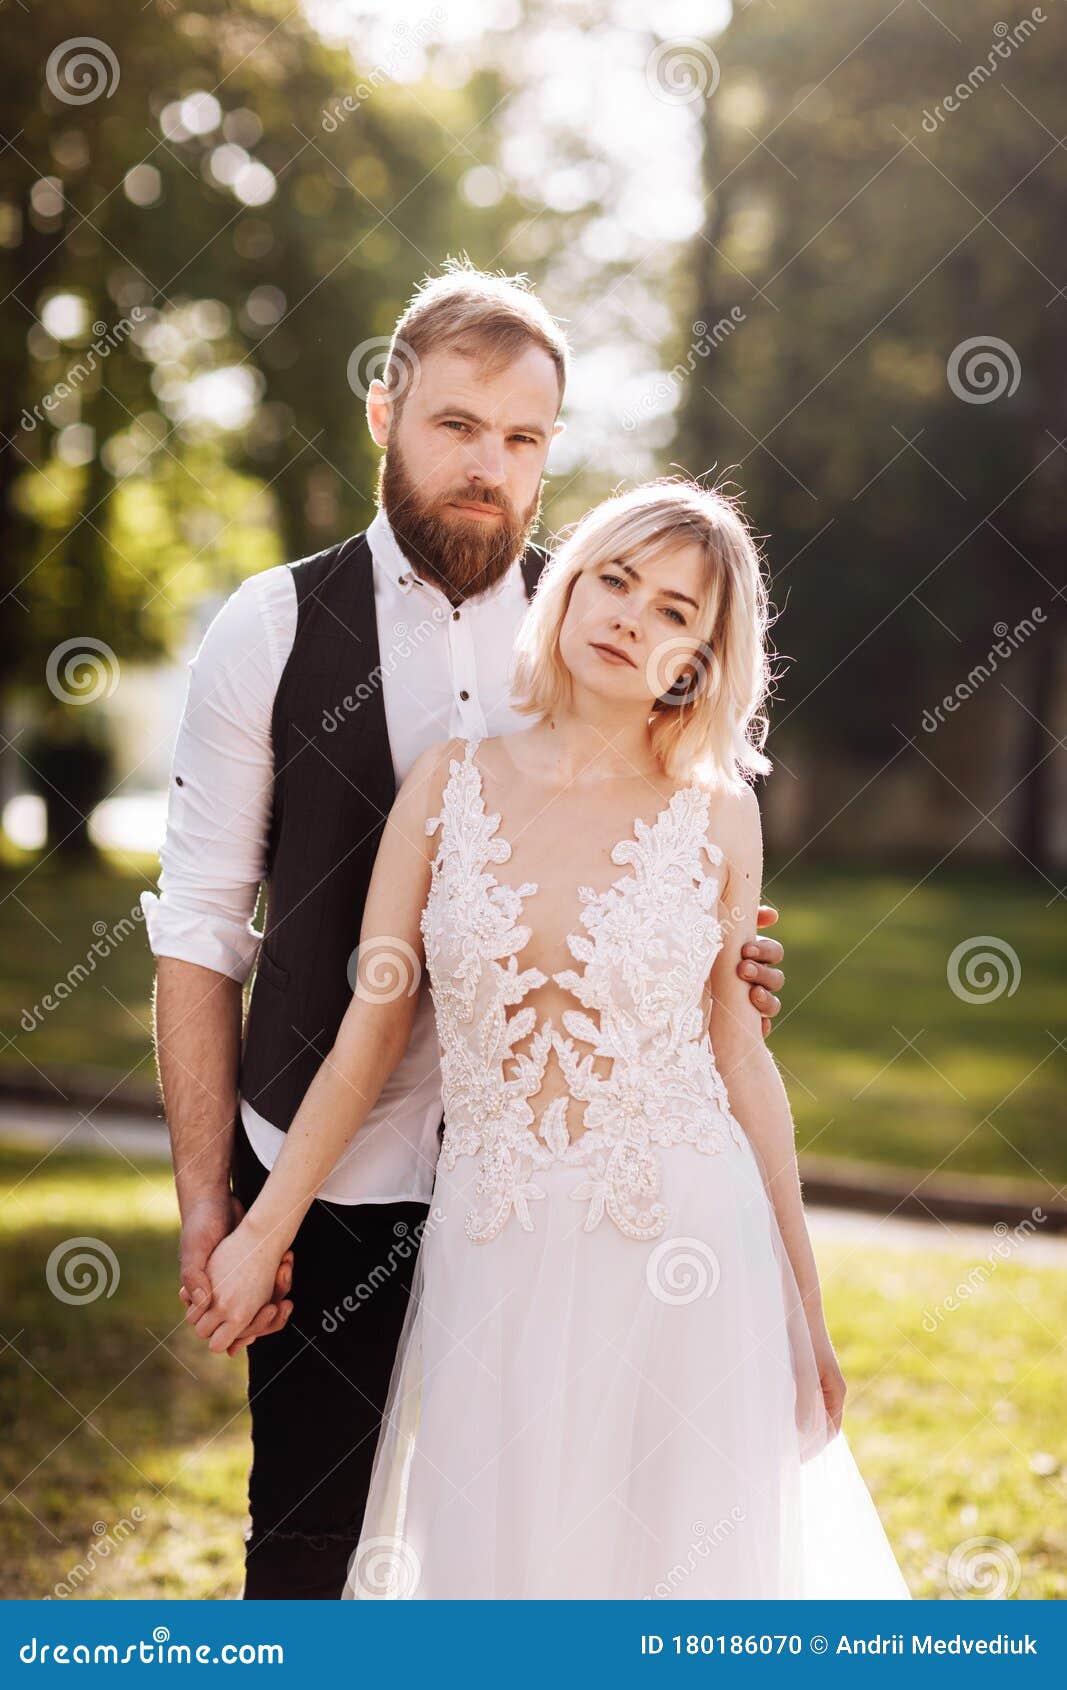 Happy Married Couple in Simple Wedding Dresses